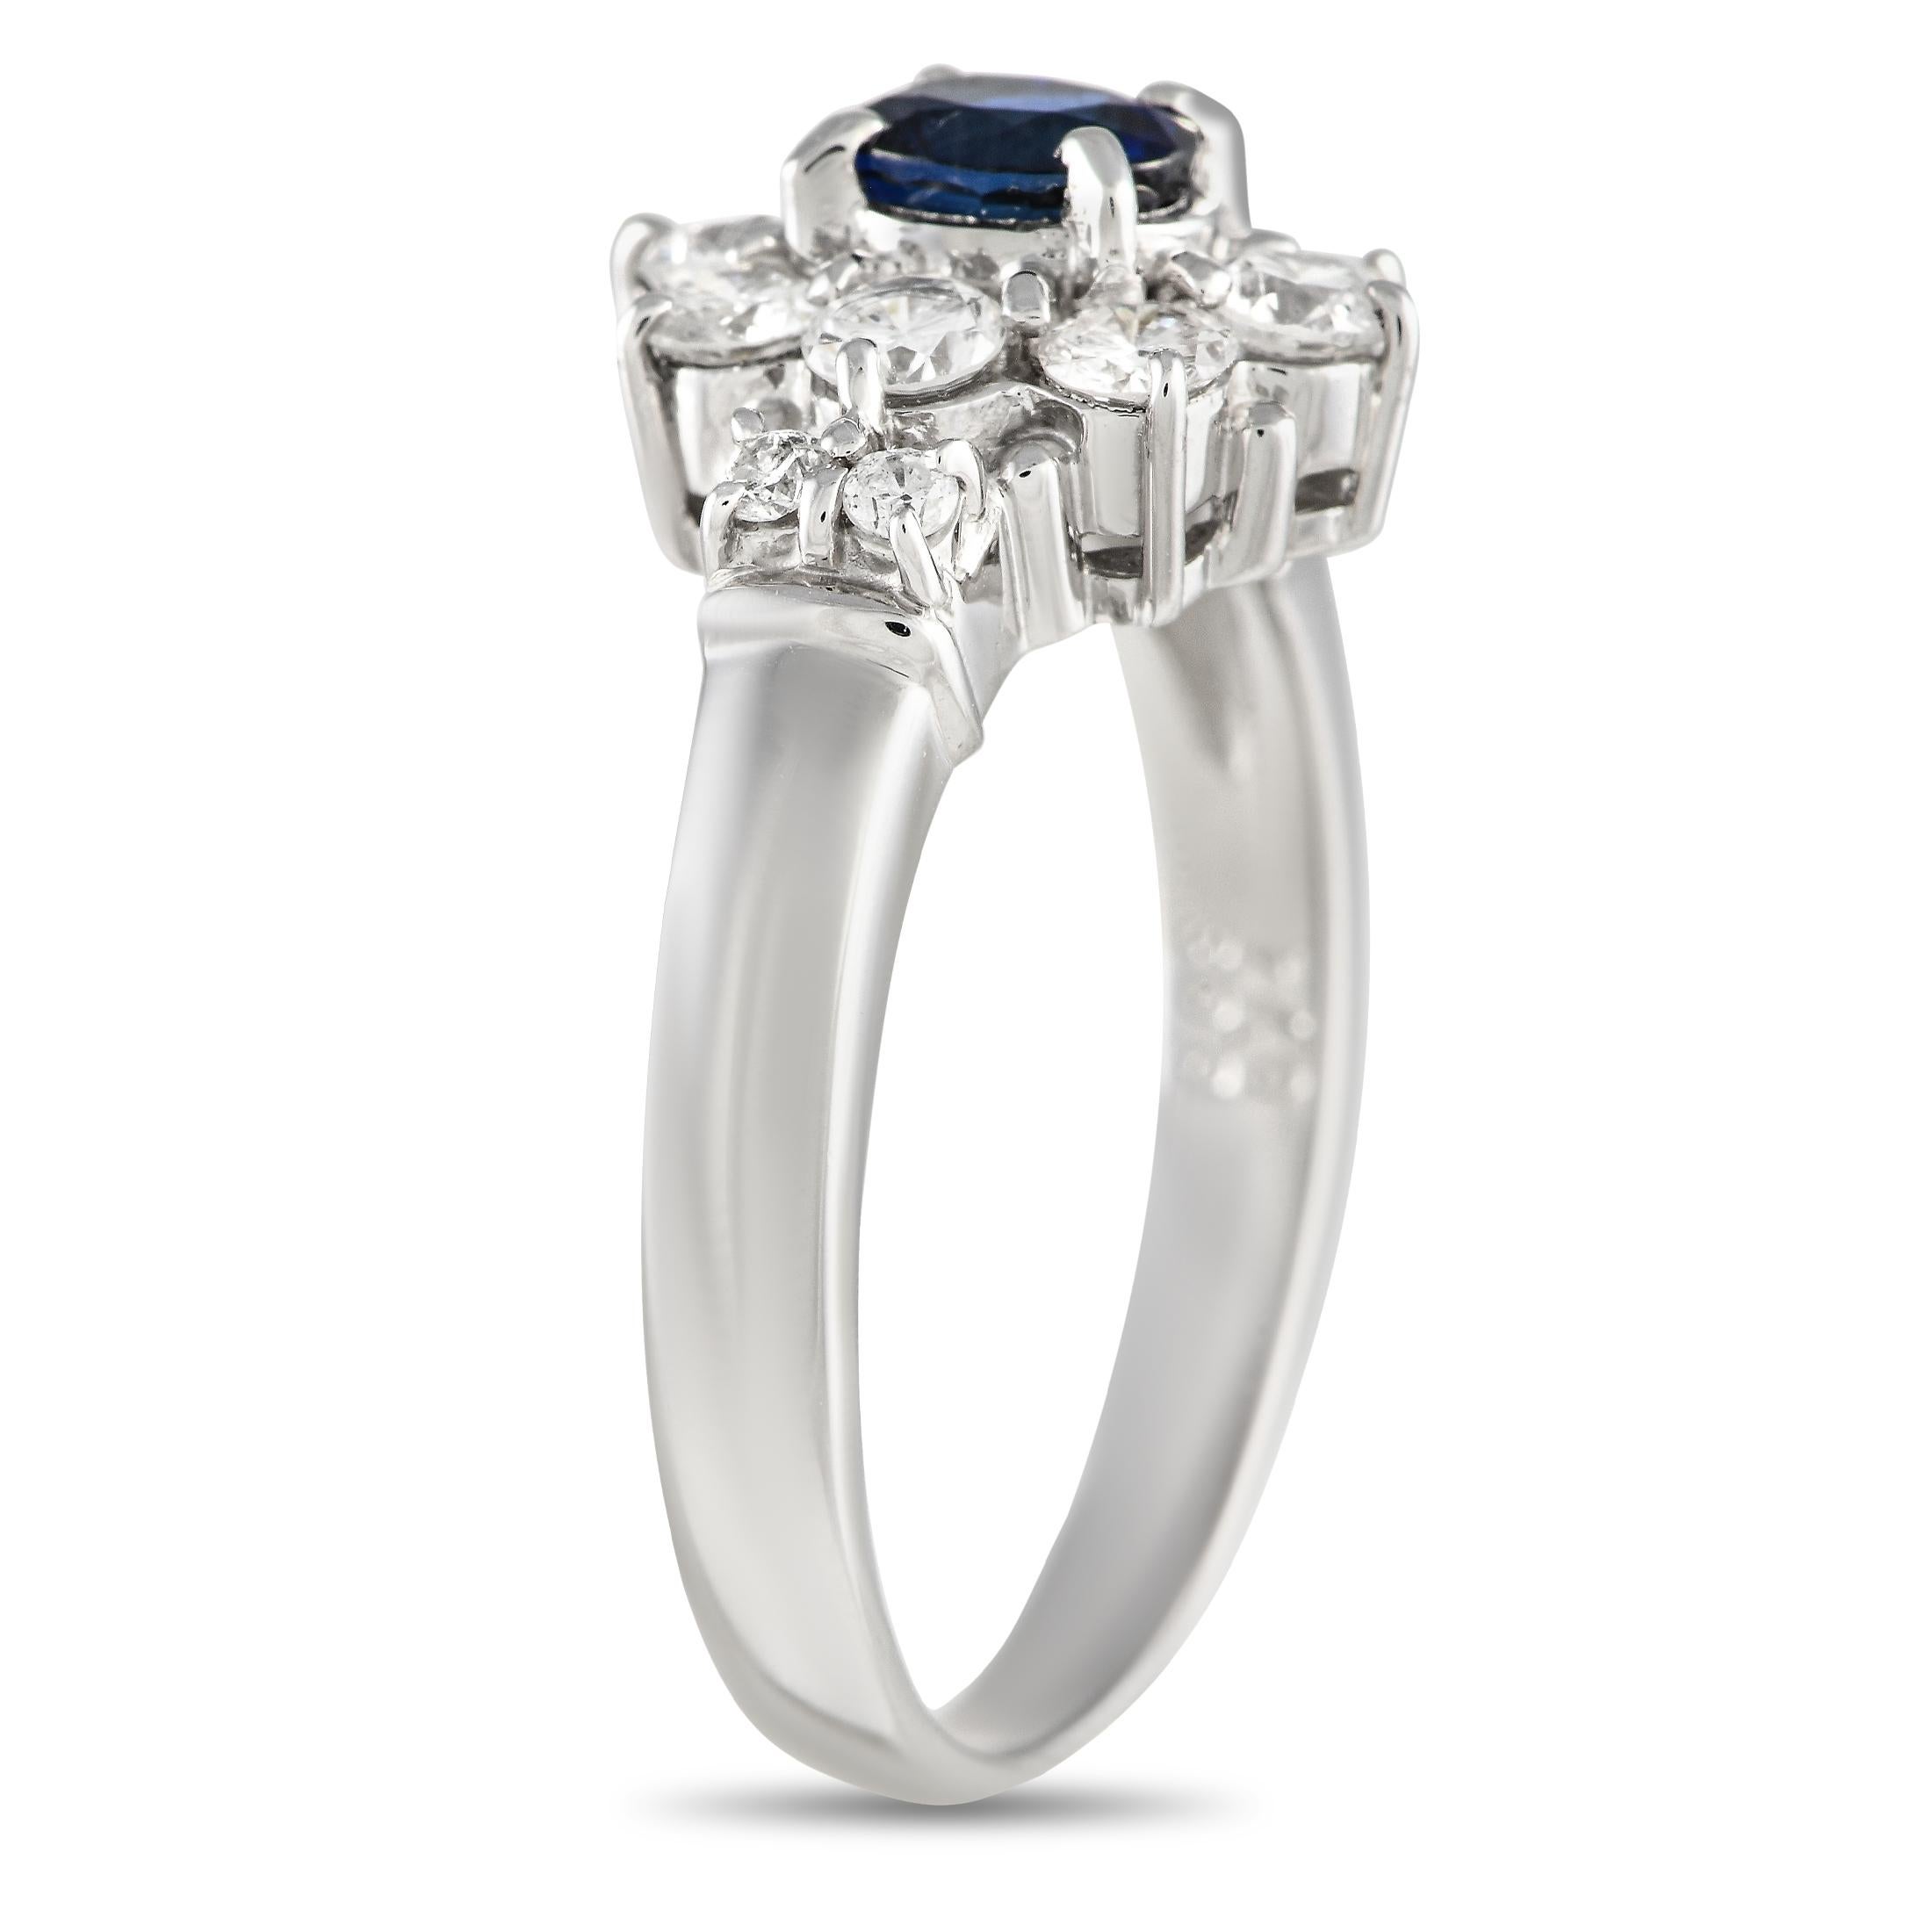 A sleek Platinum setting allows an array of sparkling gemstones to take center stage on this elegant ring. At the center, a 0.63 carat Sapphire makes a statement thanks to a halo of Diamonds with a total weight of 0.74 carats. This piece features a